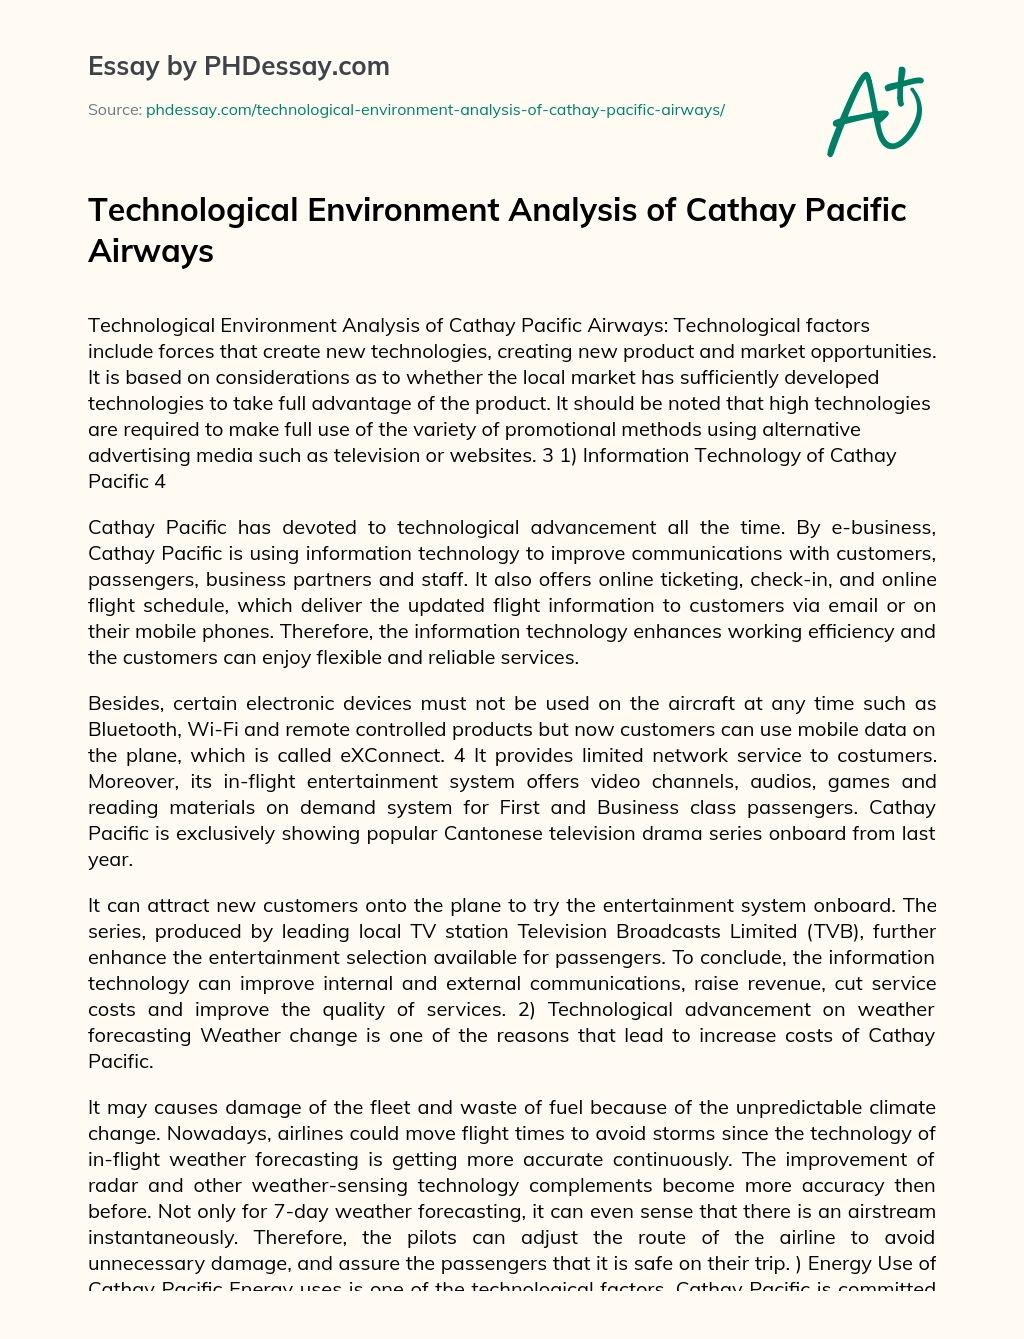 Technological Environment Analysis of Cathay Pacific Airways essay